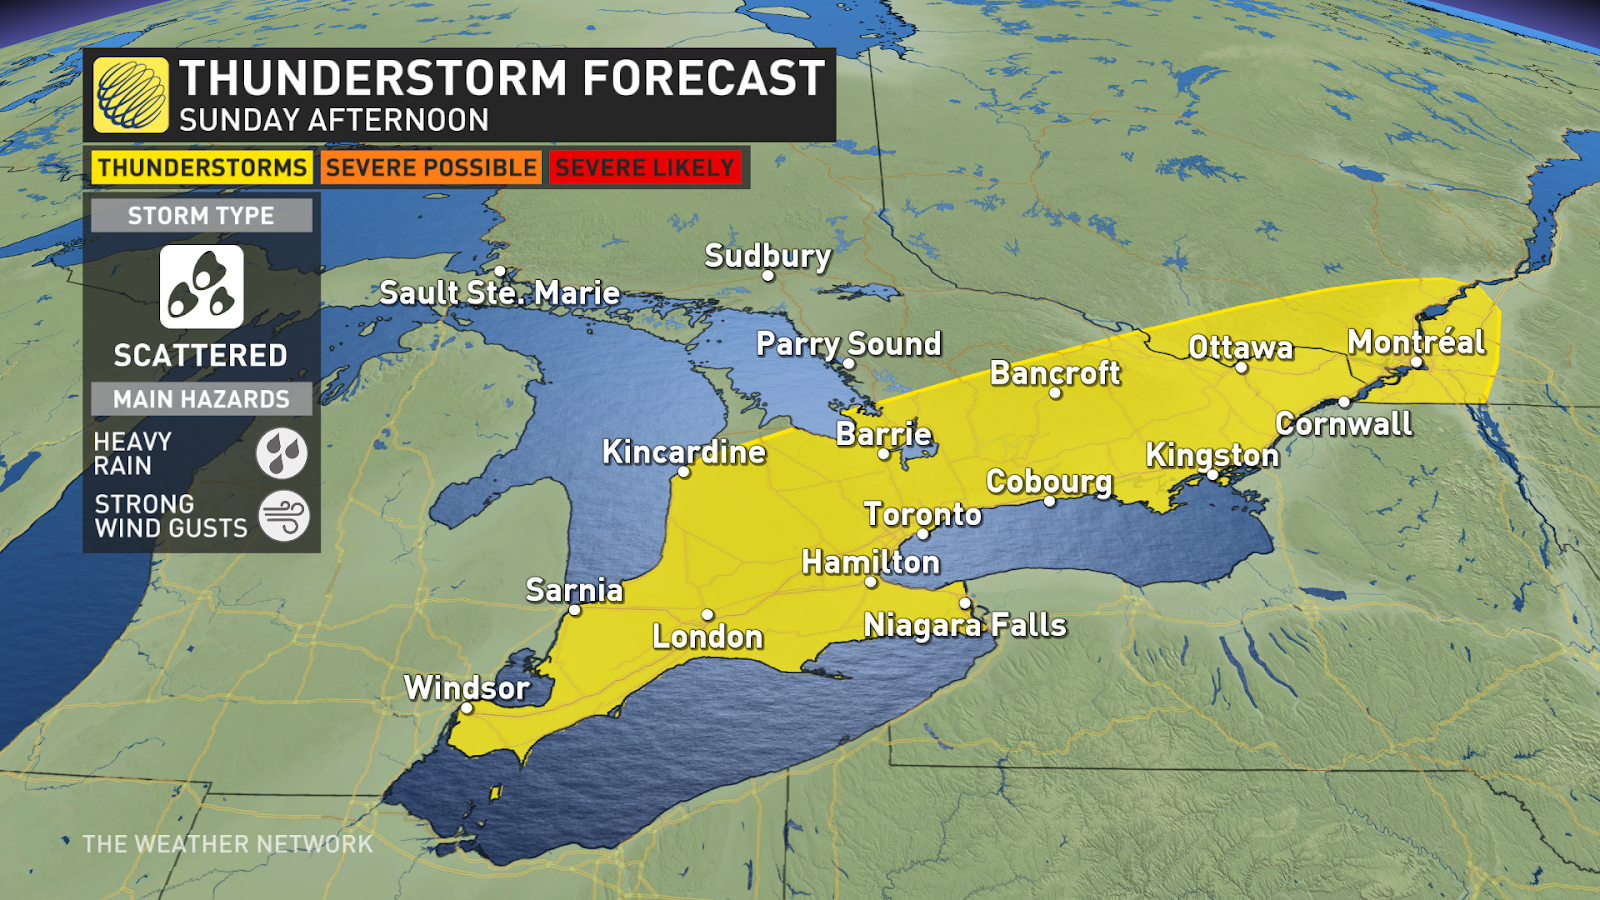 southern ontario faces summery sunday with another risk of storms